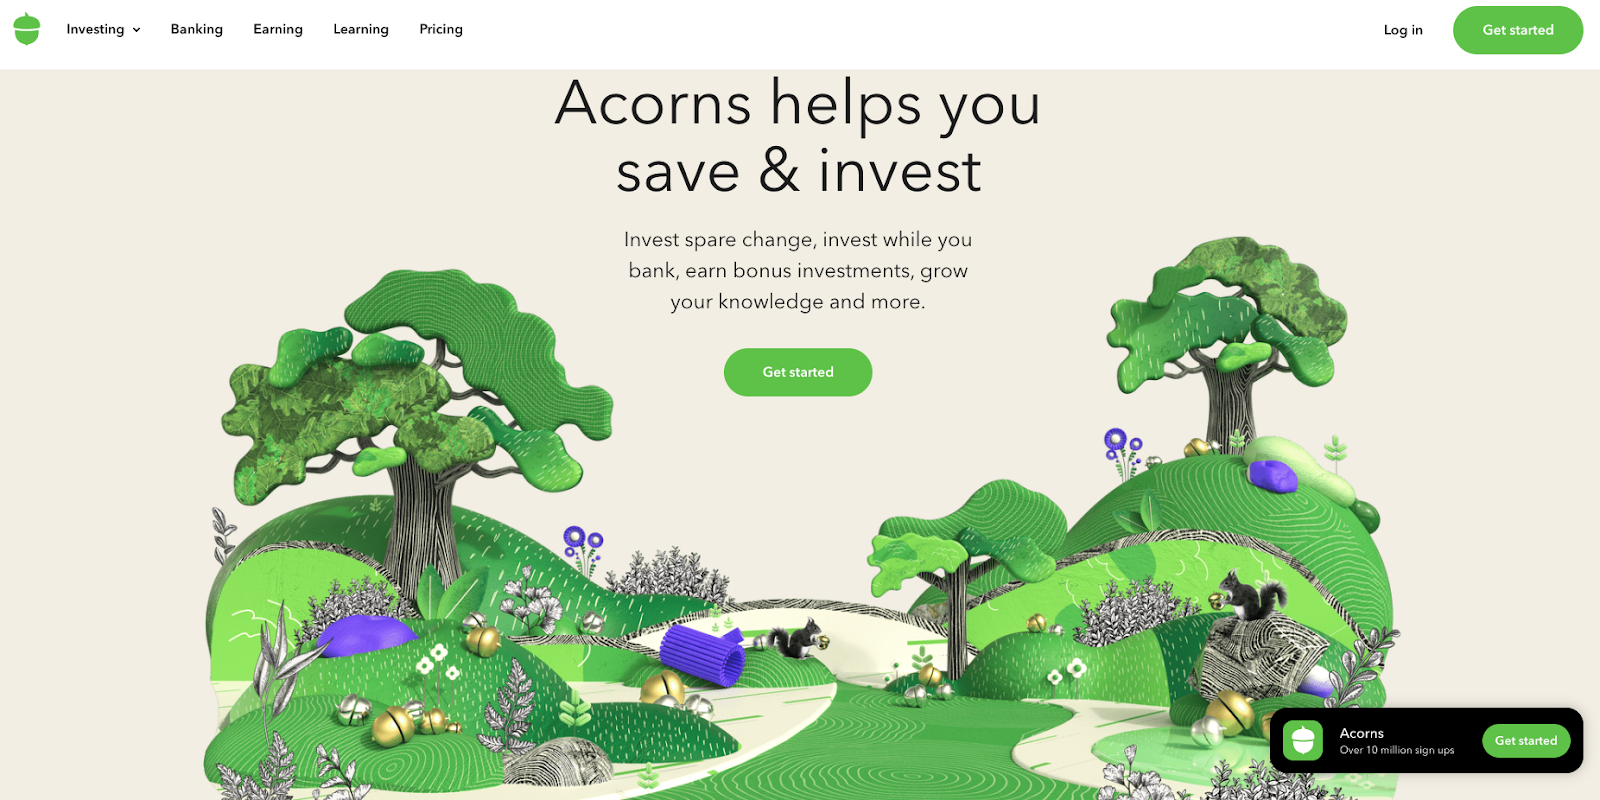 The image shows a series of complex graphics of squirrels burying acorns around a lush landscape of grass and trees. These convey Acorn’s concept of growing small investments into something more significant. The company states that they help you save, invest, earn bonus investments, and grow your knowledge.